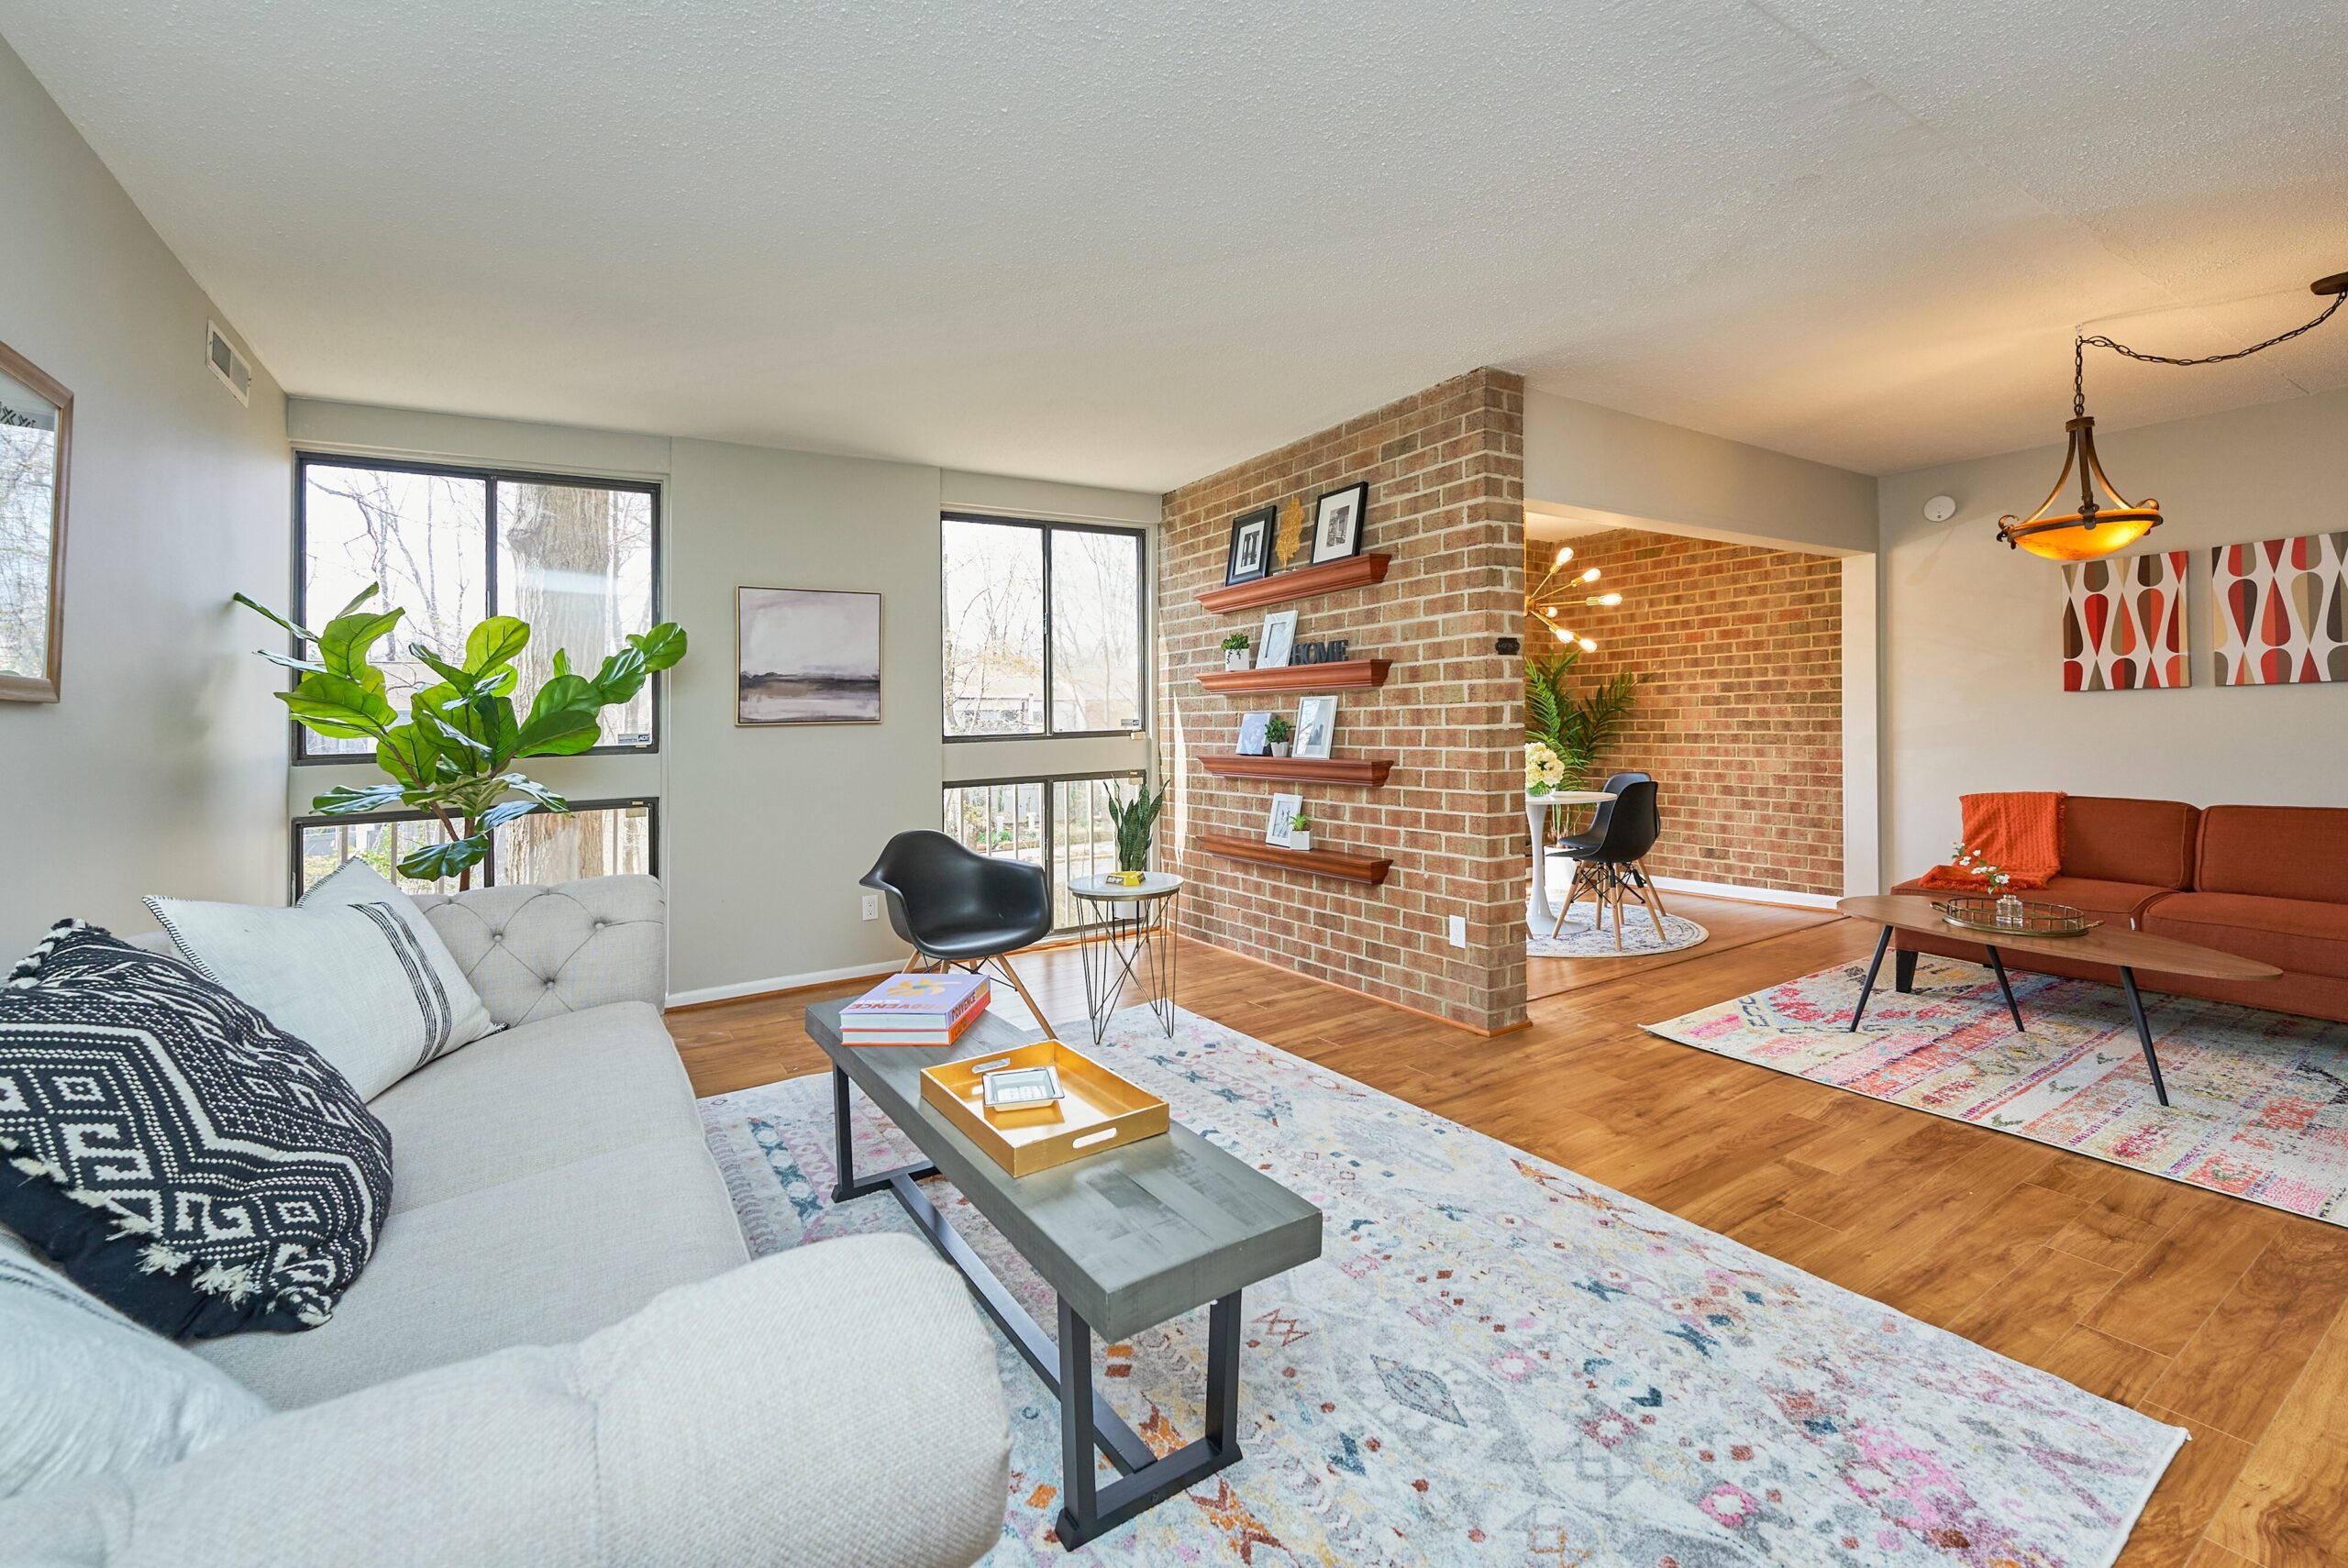 condo in Reston, Virginia showing a beautifully staged living area with hardwood floors, brick dividing wall and tasteful furniture, with lots of light from the windows